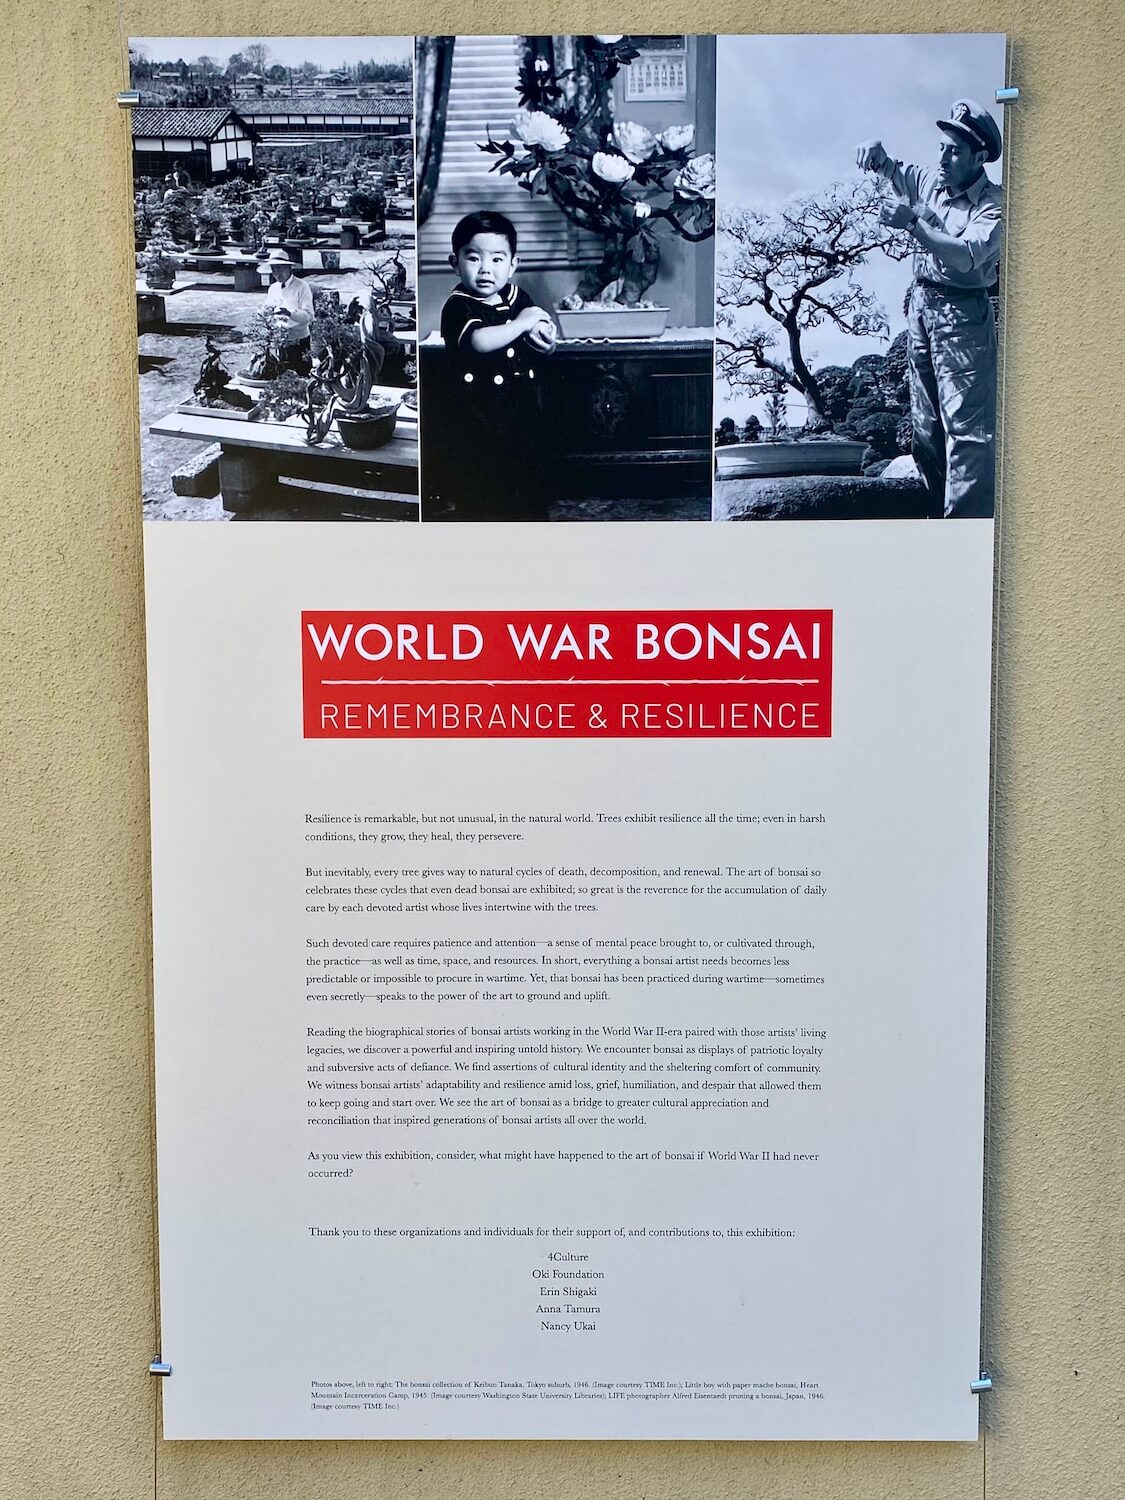 This placard welcomes guests to the Pacific Bonsai Museum and the specific exhibit titled "World War Bonsai" which is written in bright red while three portrait style black and white photos feature history around the time of World War 2 in the United States. 